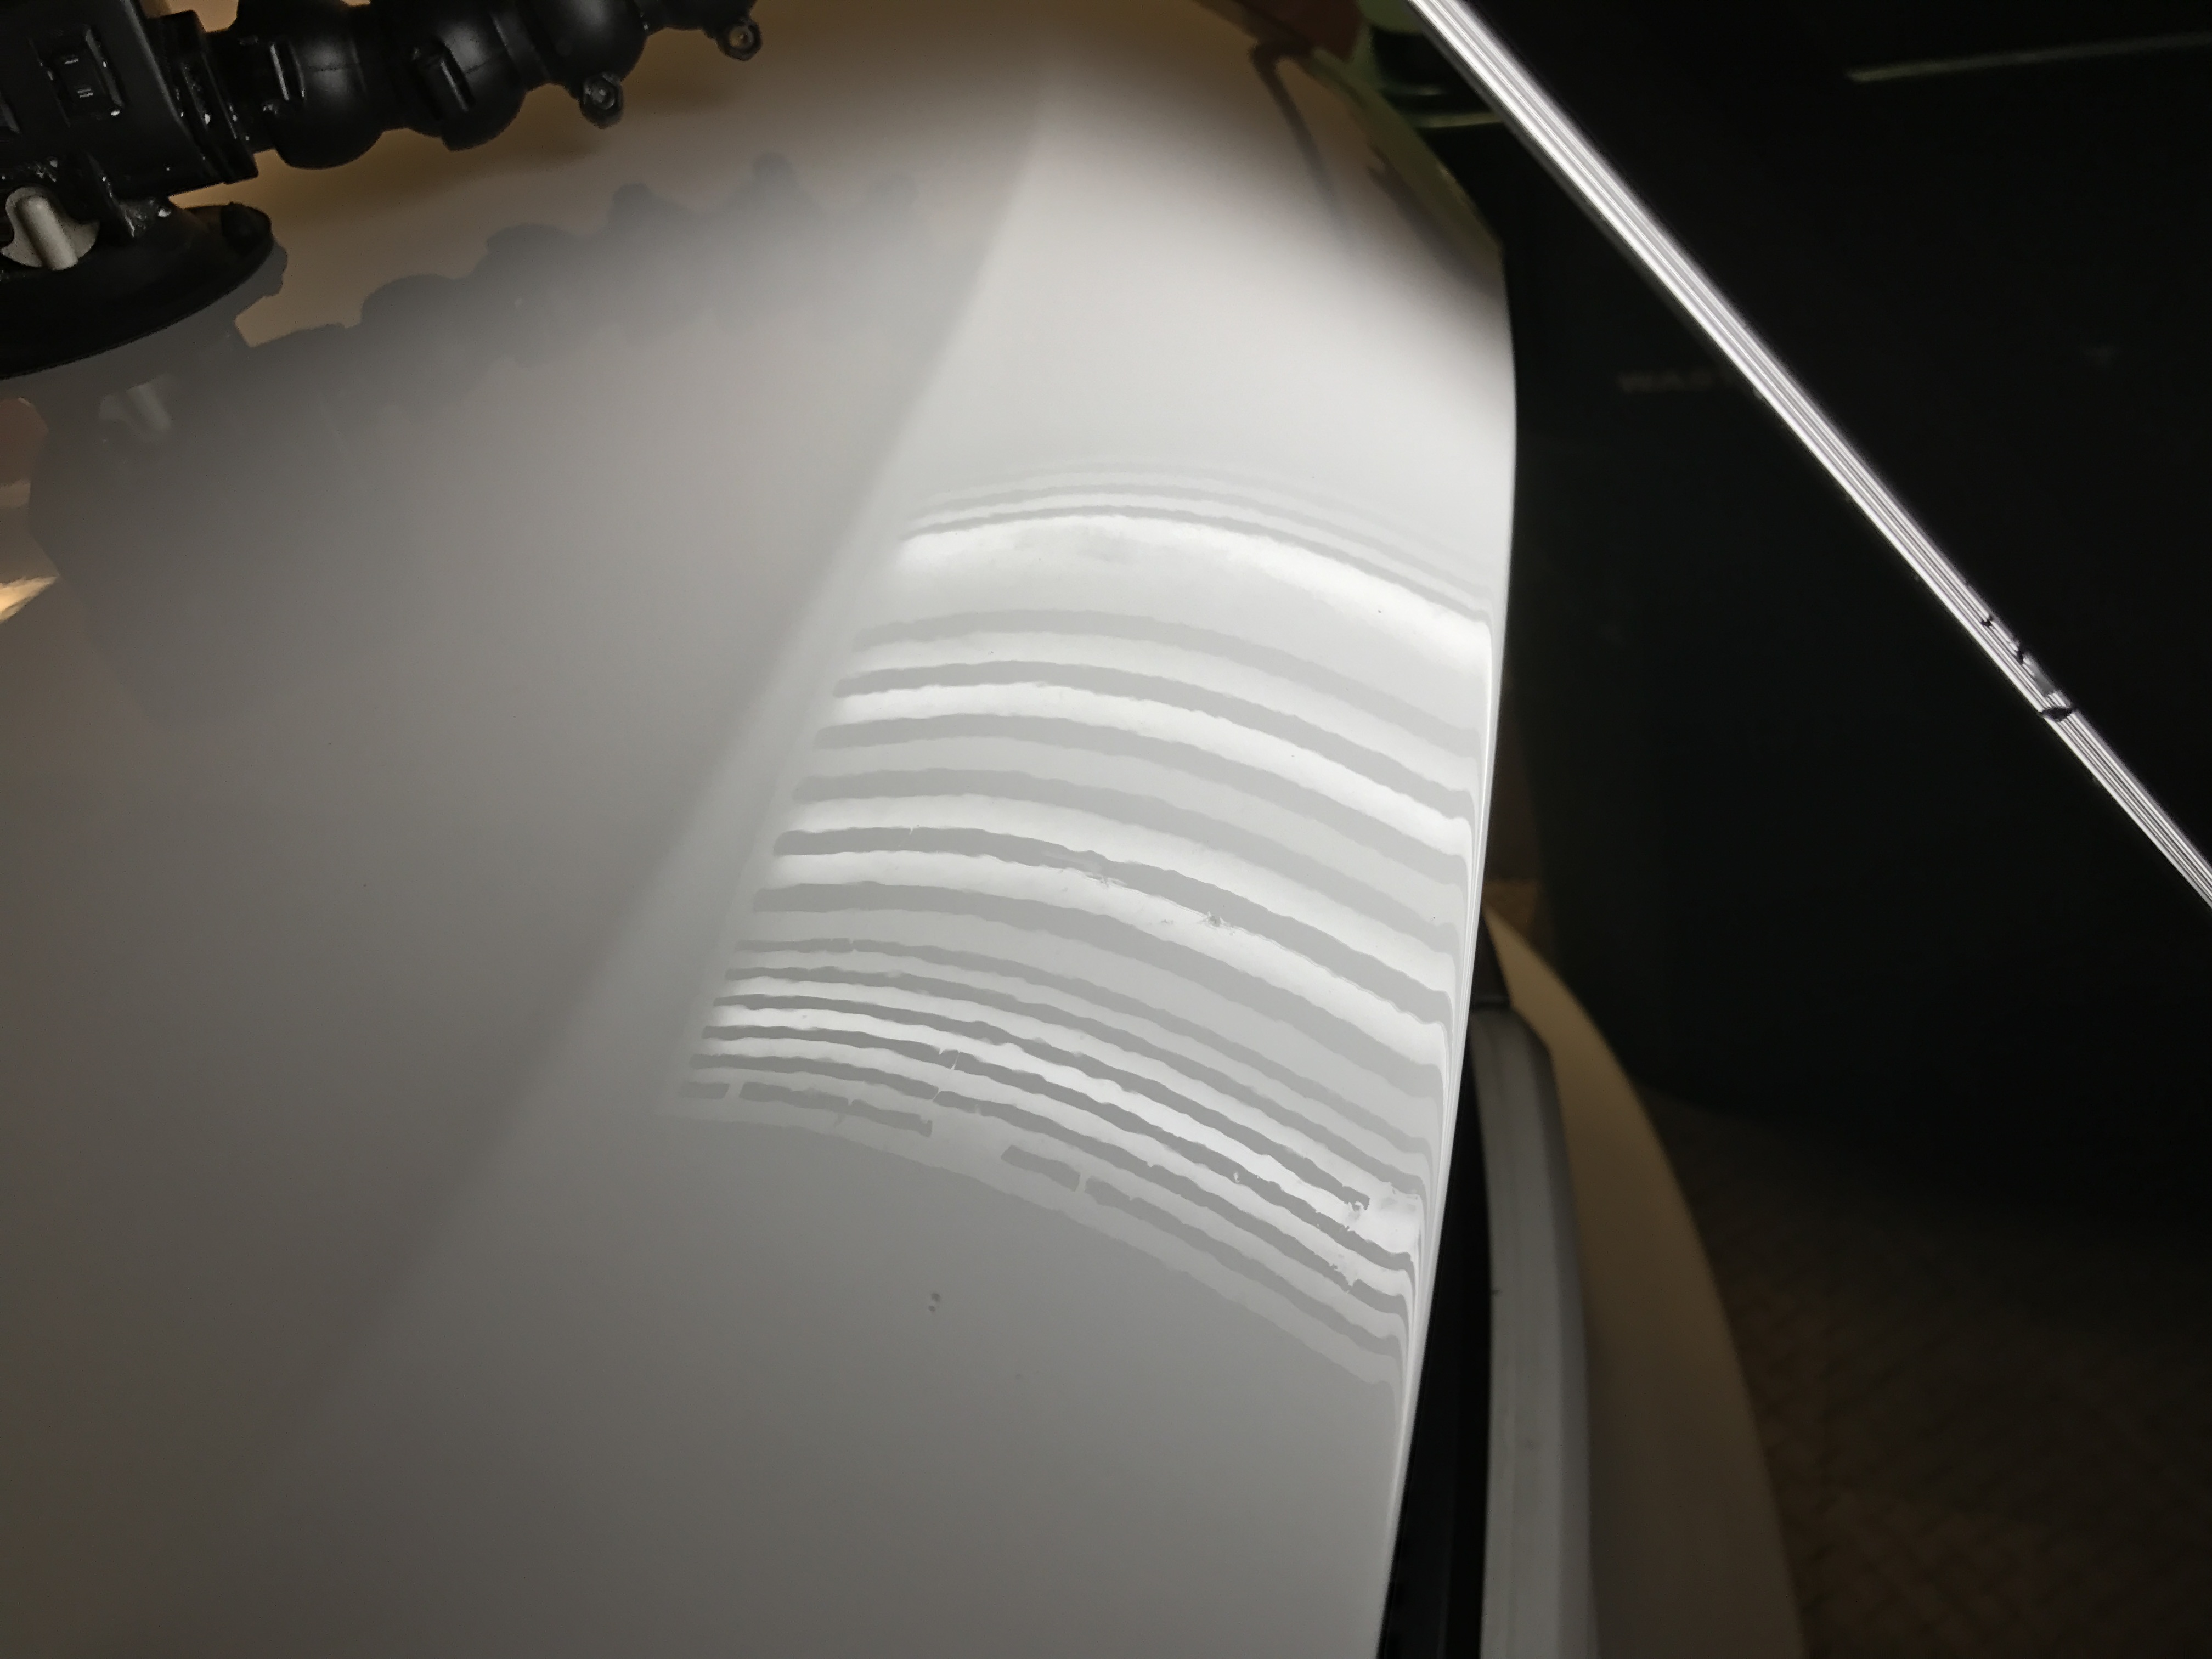 2015 Dodge Durango RT Paintless Dent Removal, Springfield IL http://217dent.com After Image of Hood Dents